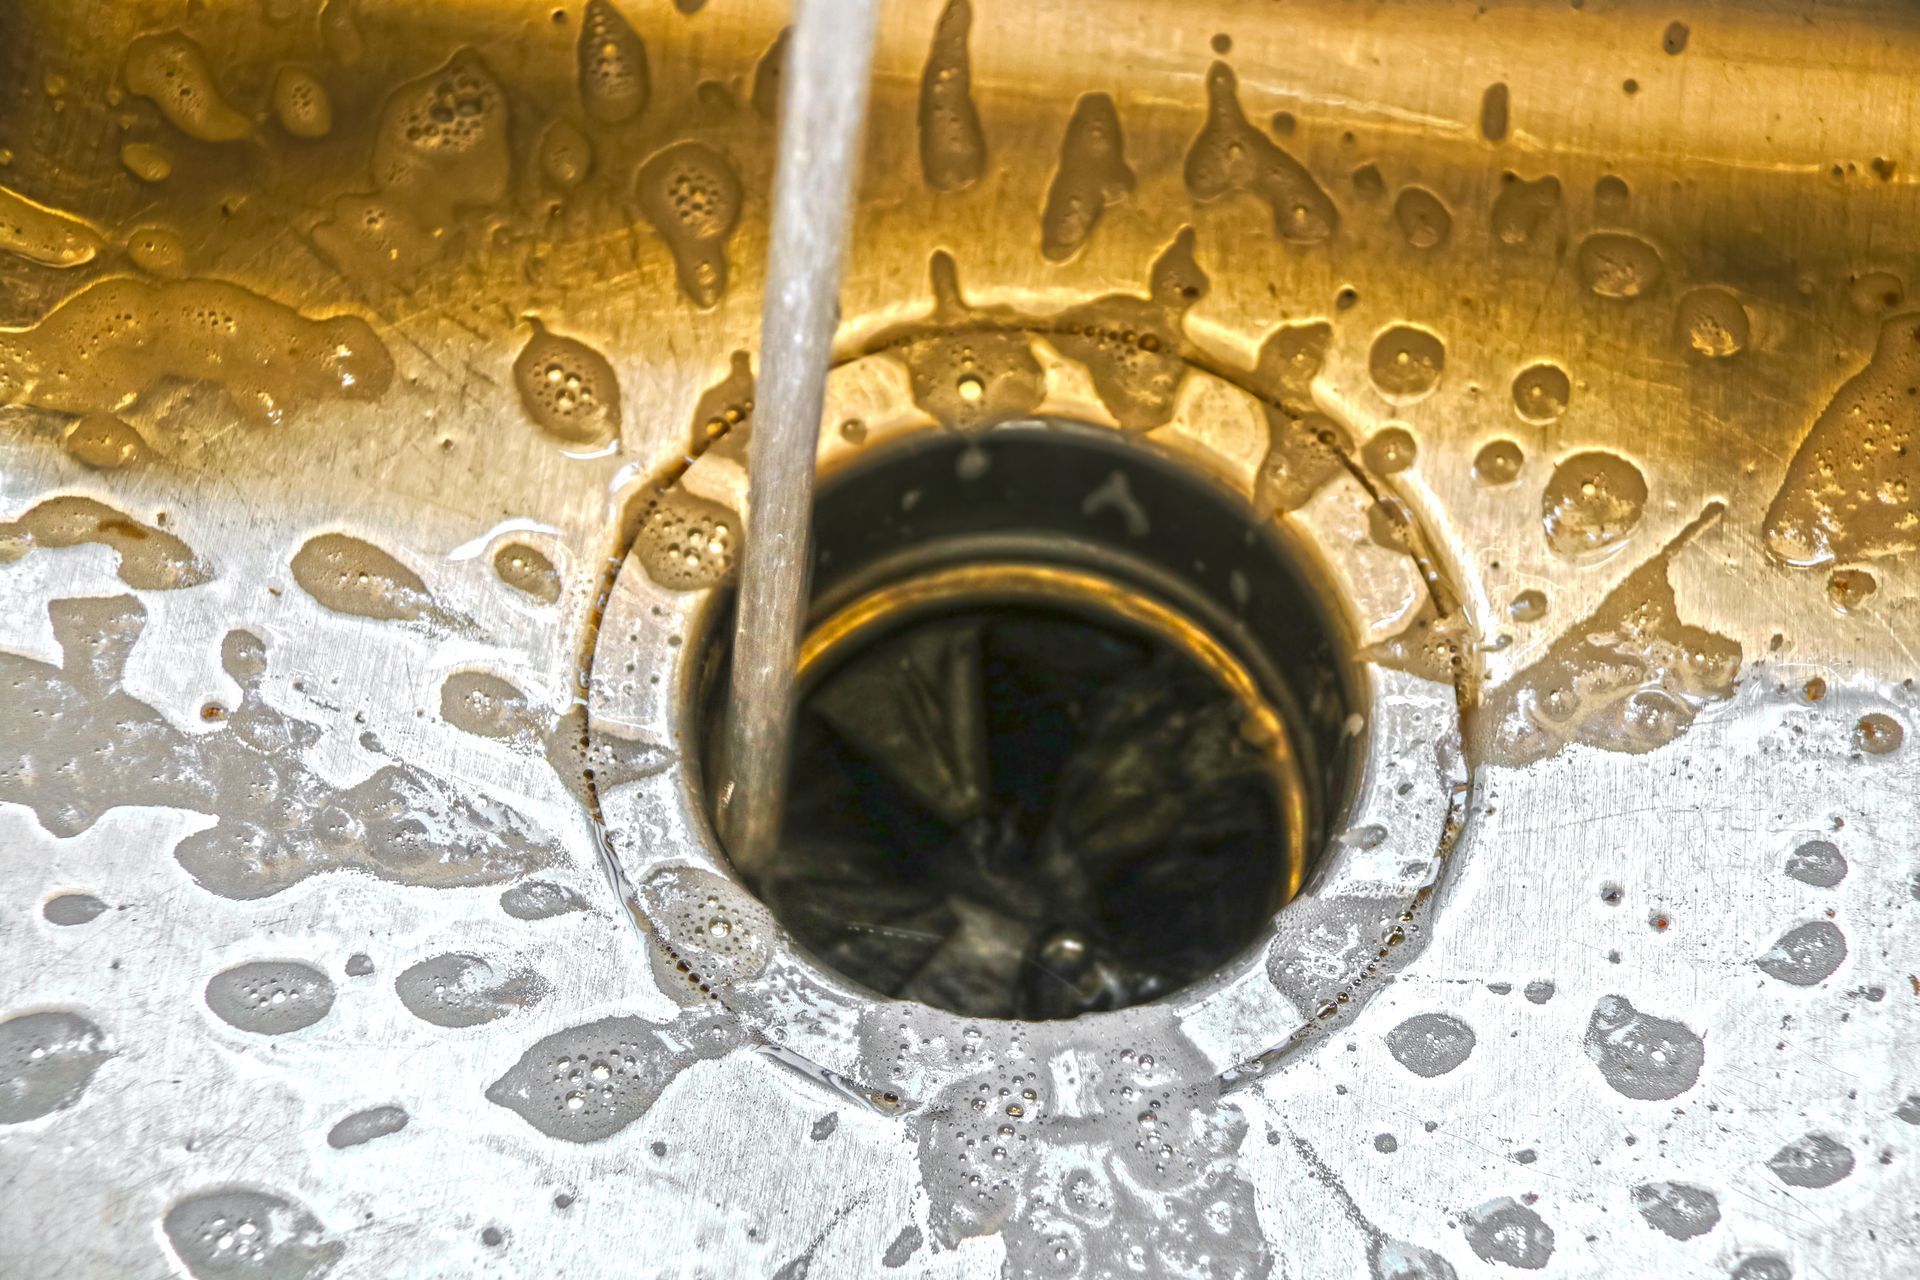 Residential Drain Cleaning - Sewer & Drain Cleaning Services in Rochester, MN